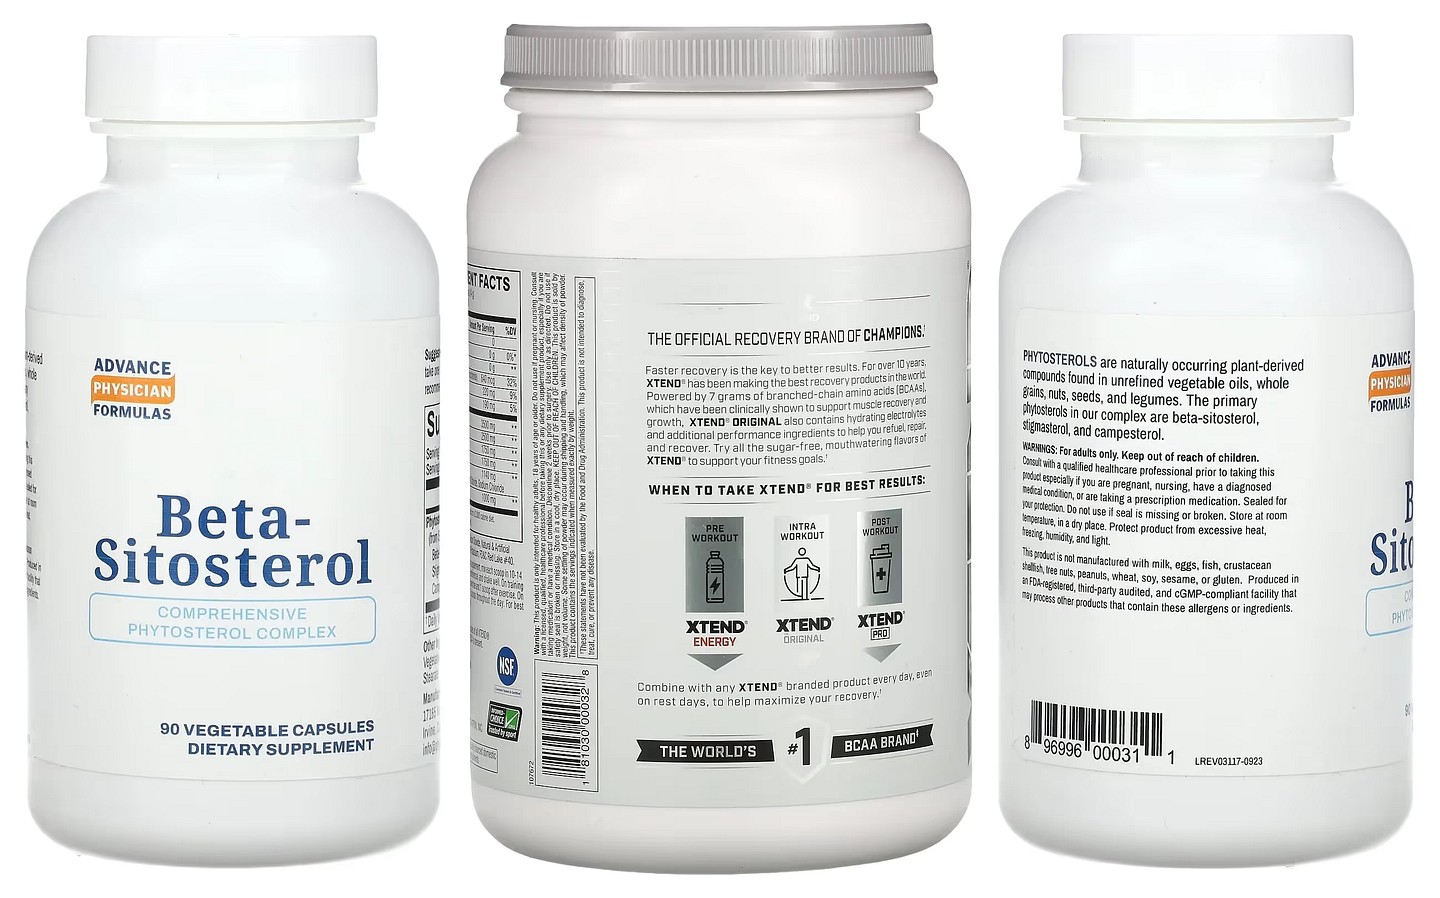 Advance Physician Formulas, Beta-Sitosterol packaging